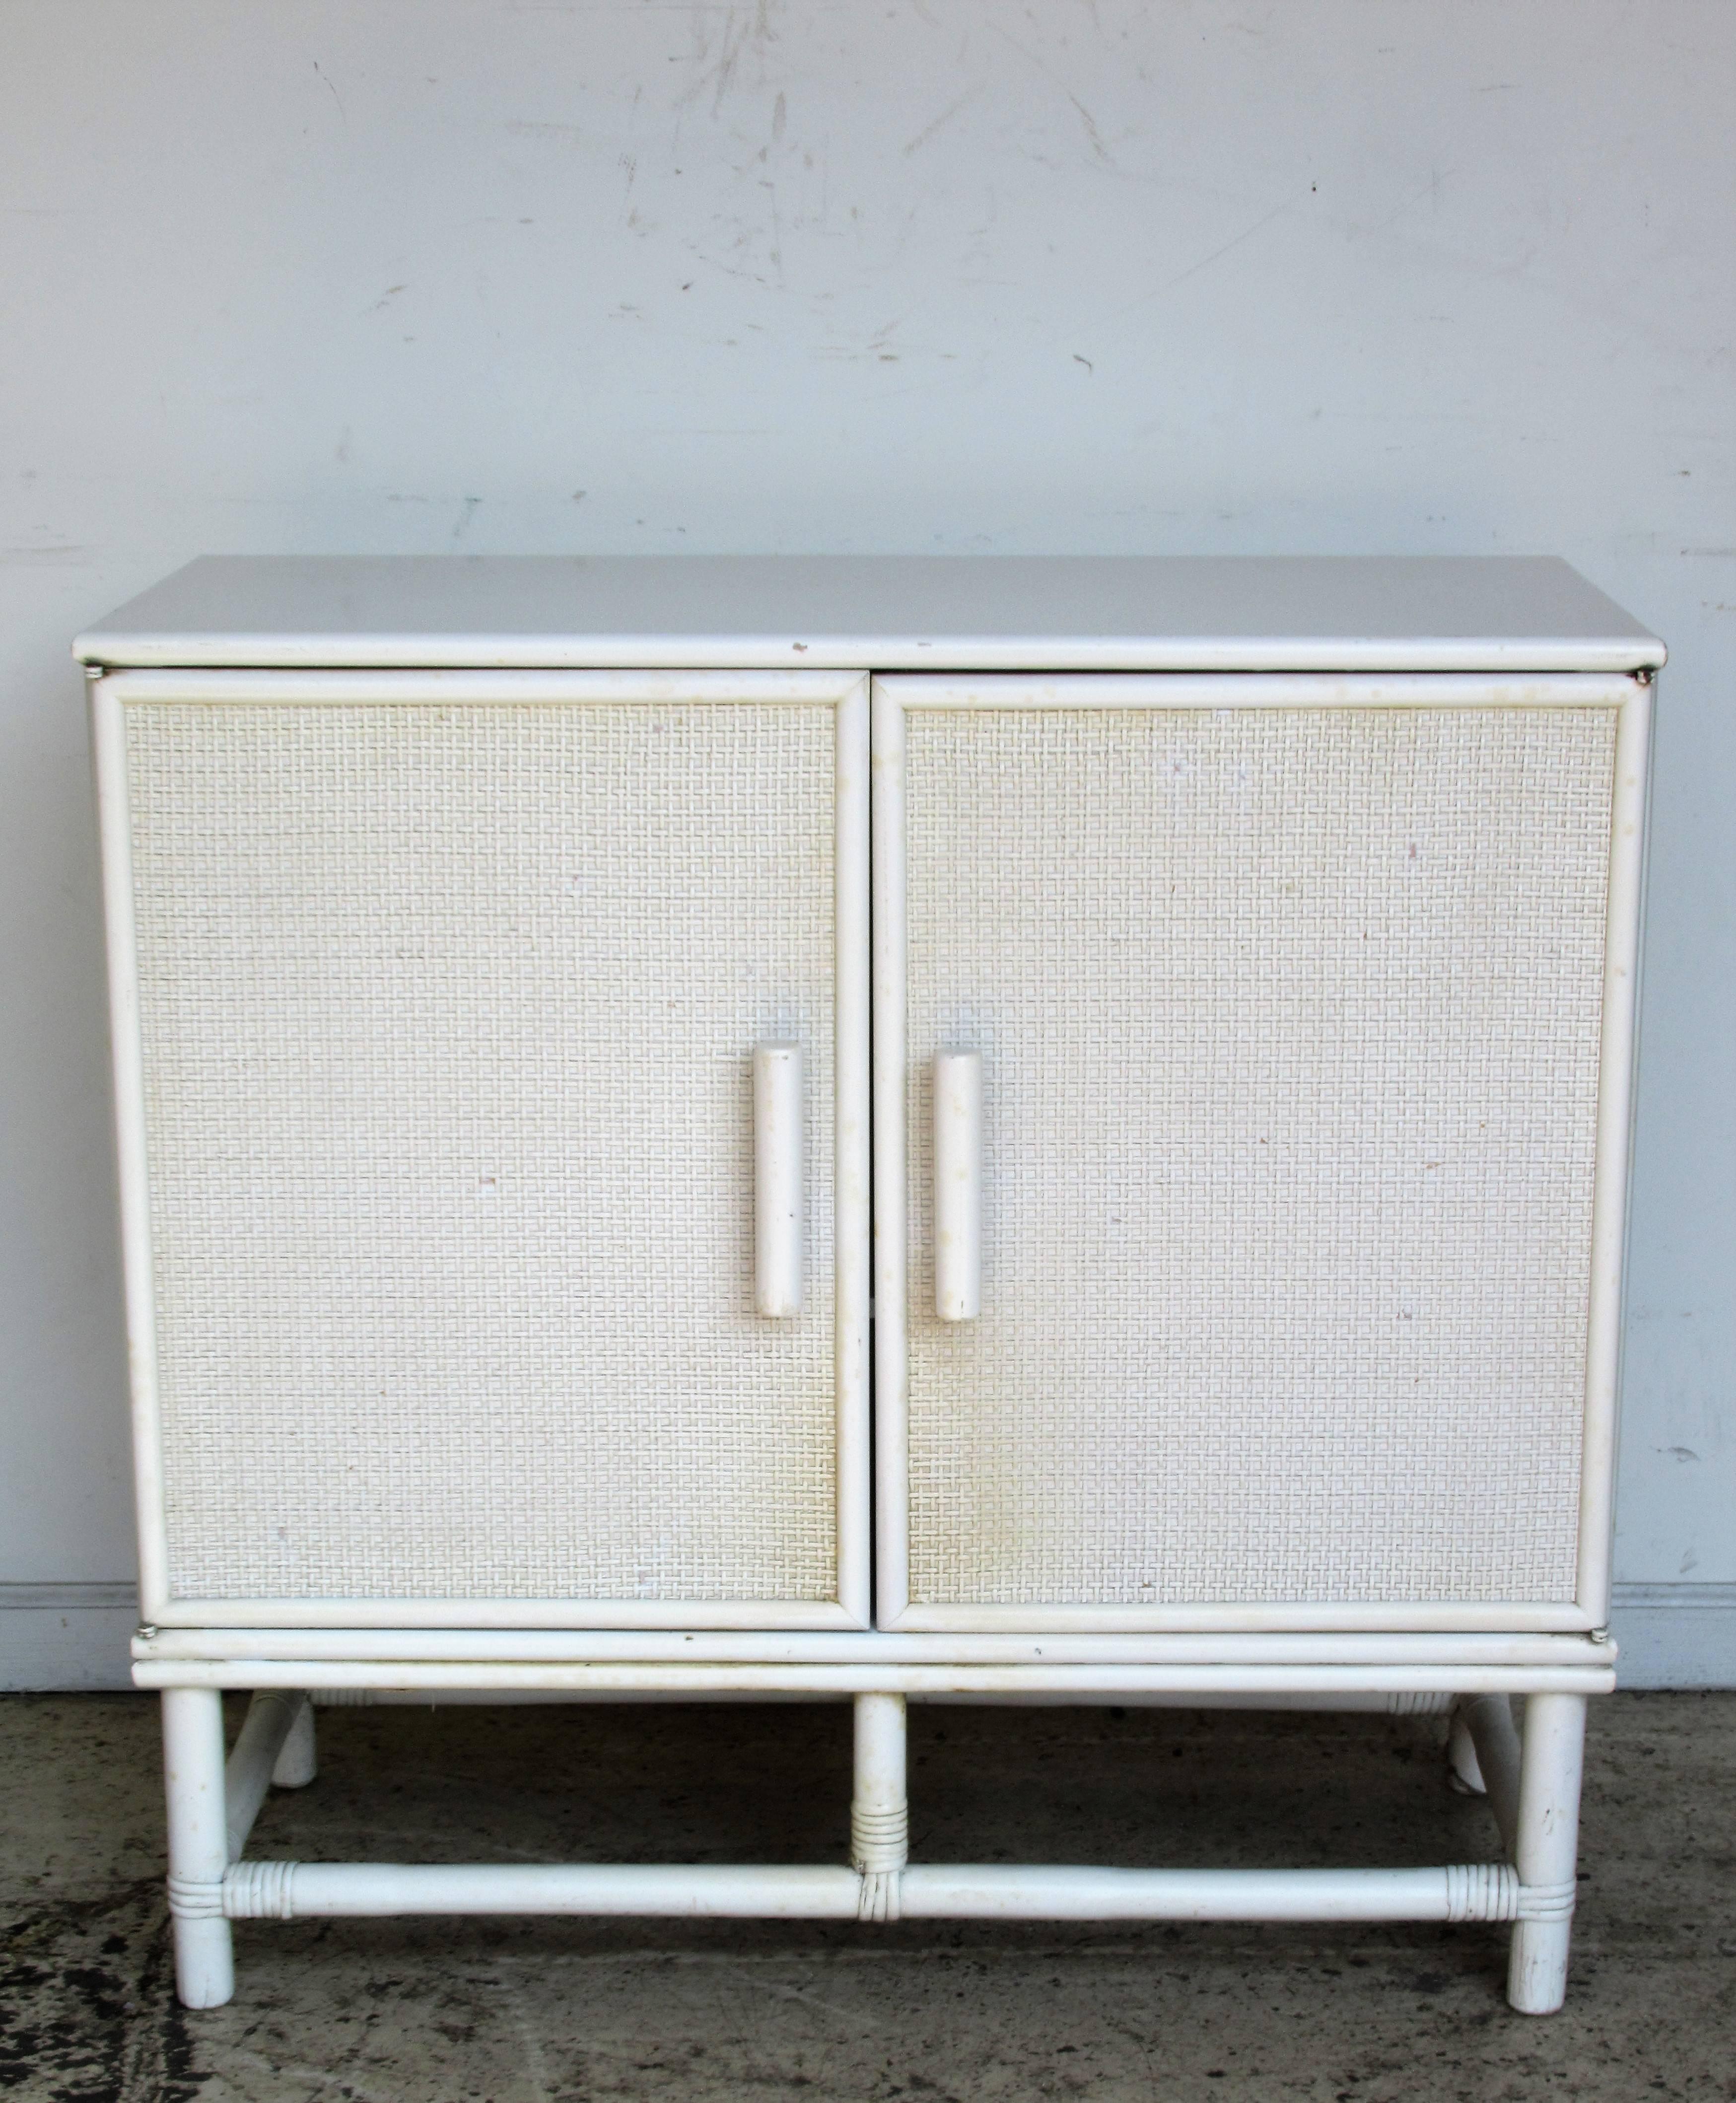 Mid-20th century minimalist two-door cabinet with open interior fitted for adjustable shelving. Original white enamel painted finish is in good condition. A versatile design that can be used in many different ways. Very high quality heavyweight